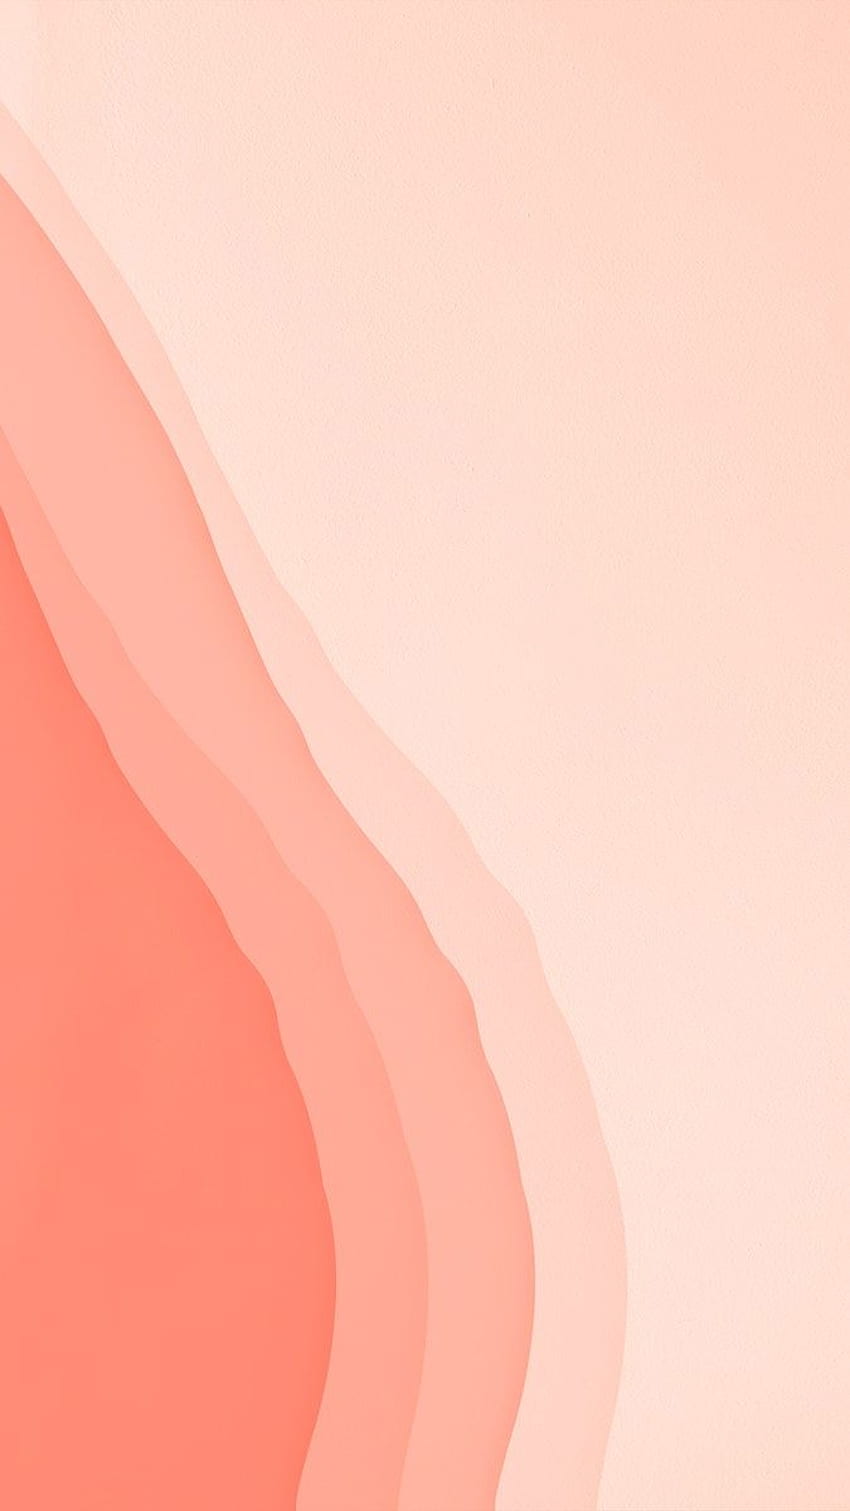 premium of Abstract coral orange color psd background by Adjima about aesthetic plain background, abstract, abstract background, aesthetic, and a in 2021. Simple iphone , Peach , Minimalist, Bright Colorful Minimal iPhone HD phone wallpaper